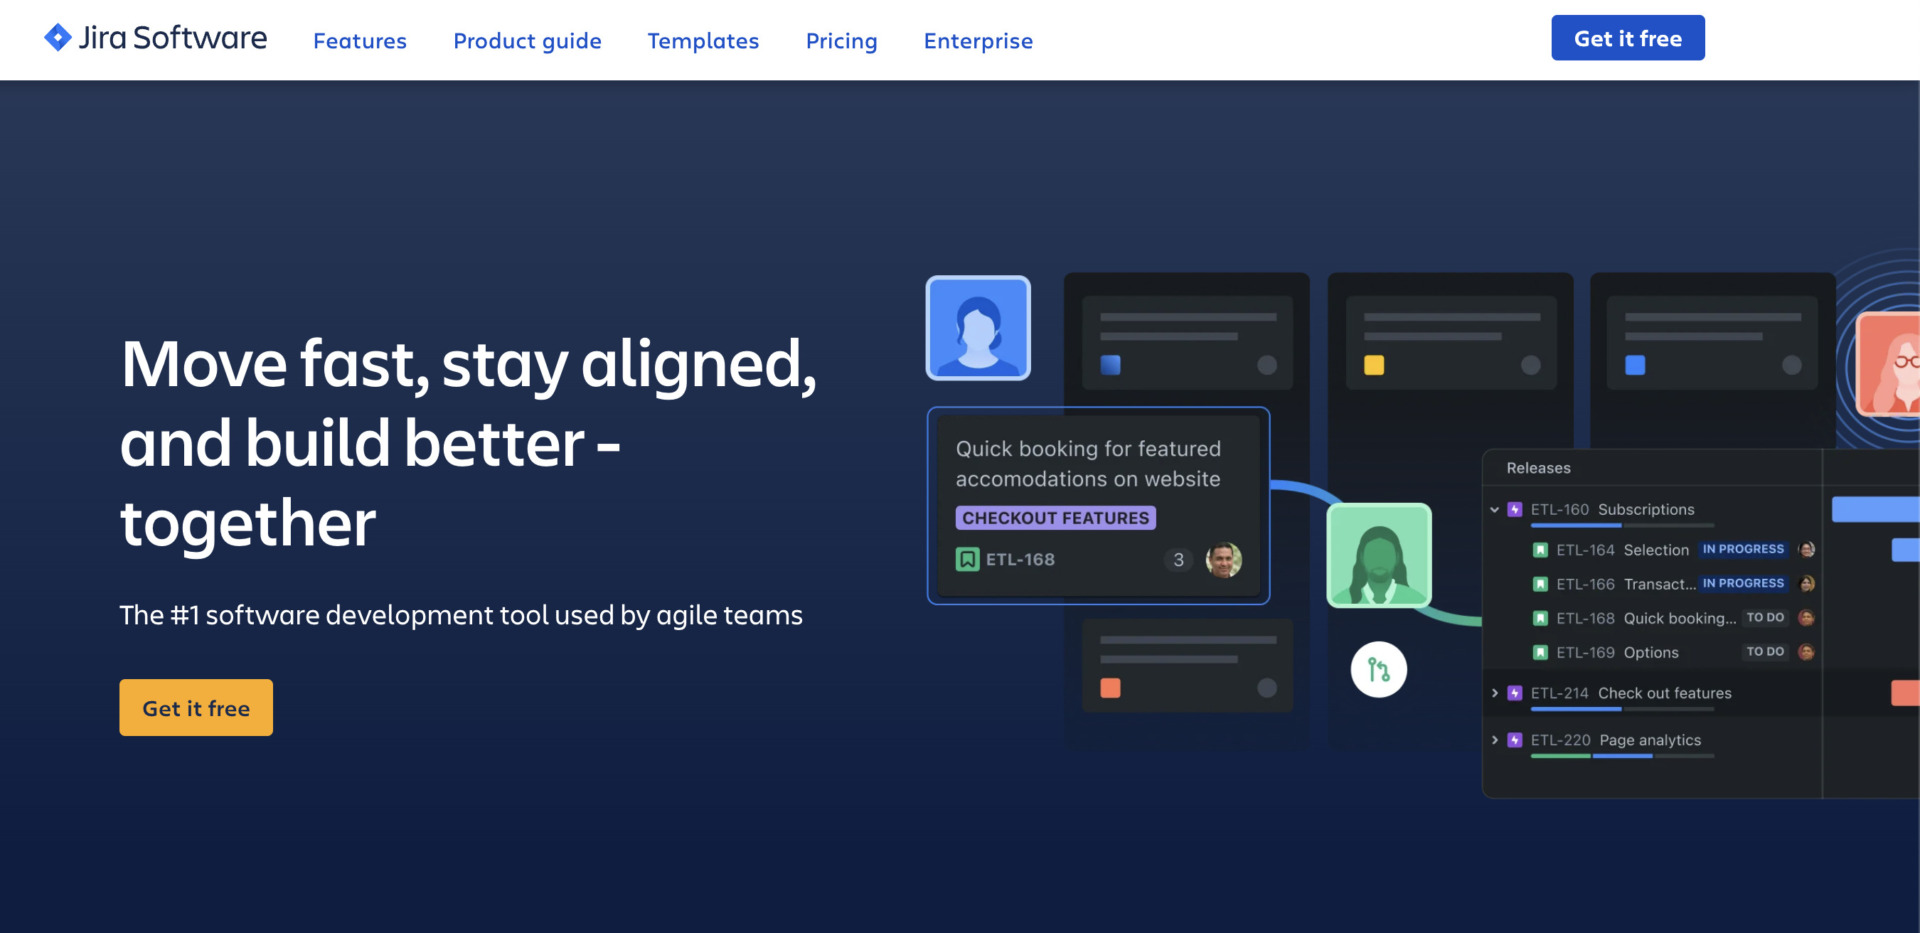 Top page of Jira